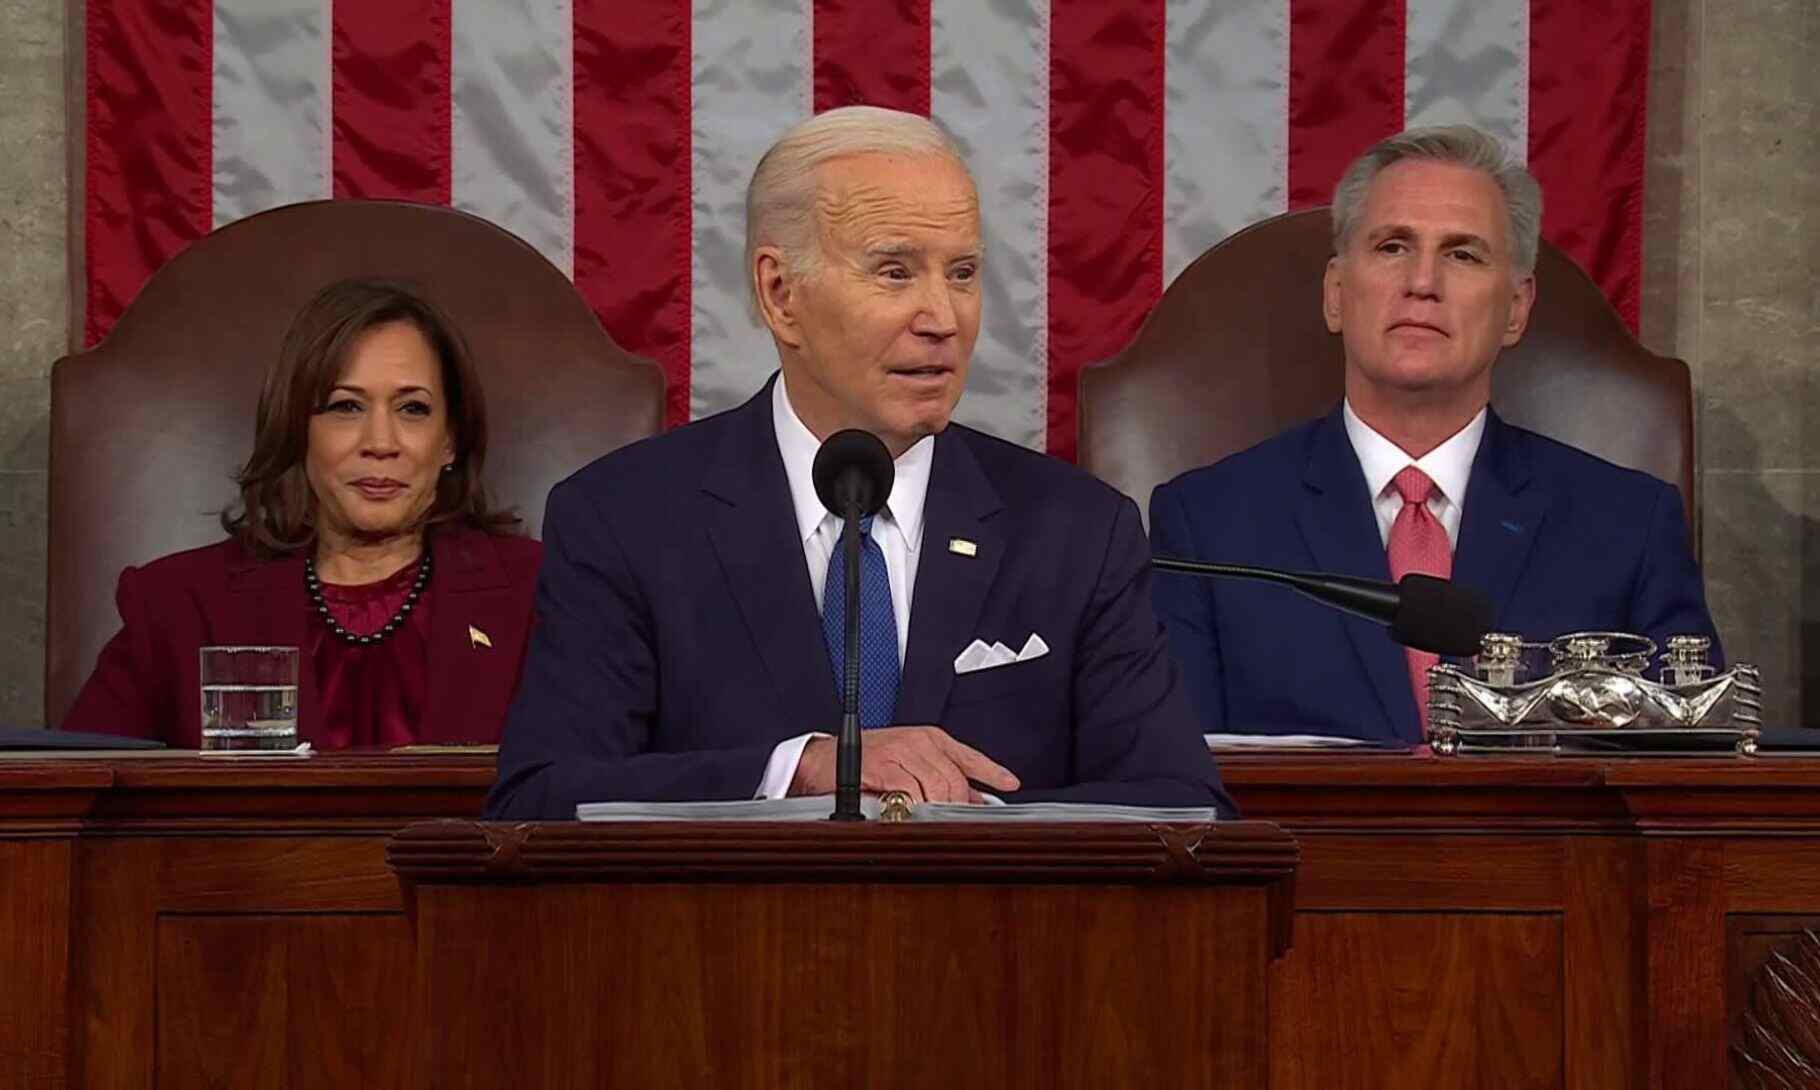 Biden’s Press Conference Draws Over 25 Million Viewers Amid Health Concerns